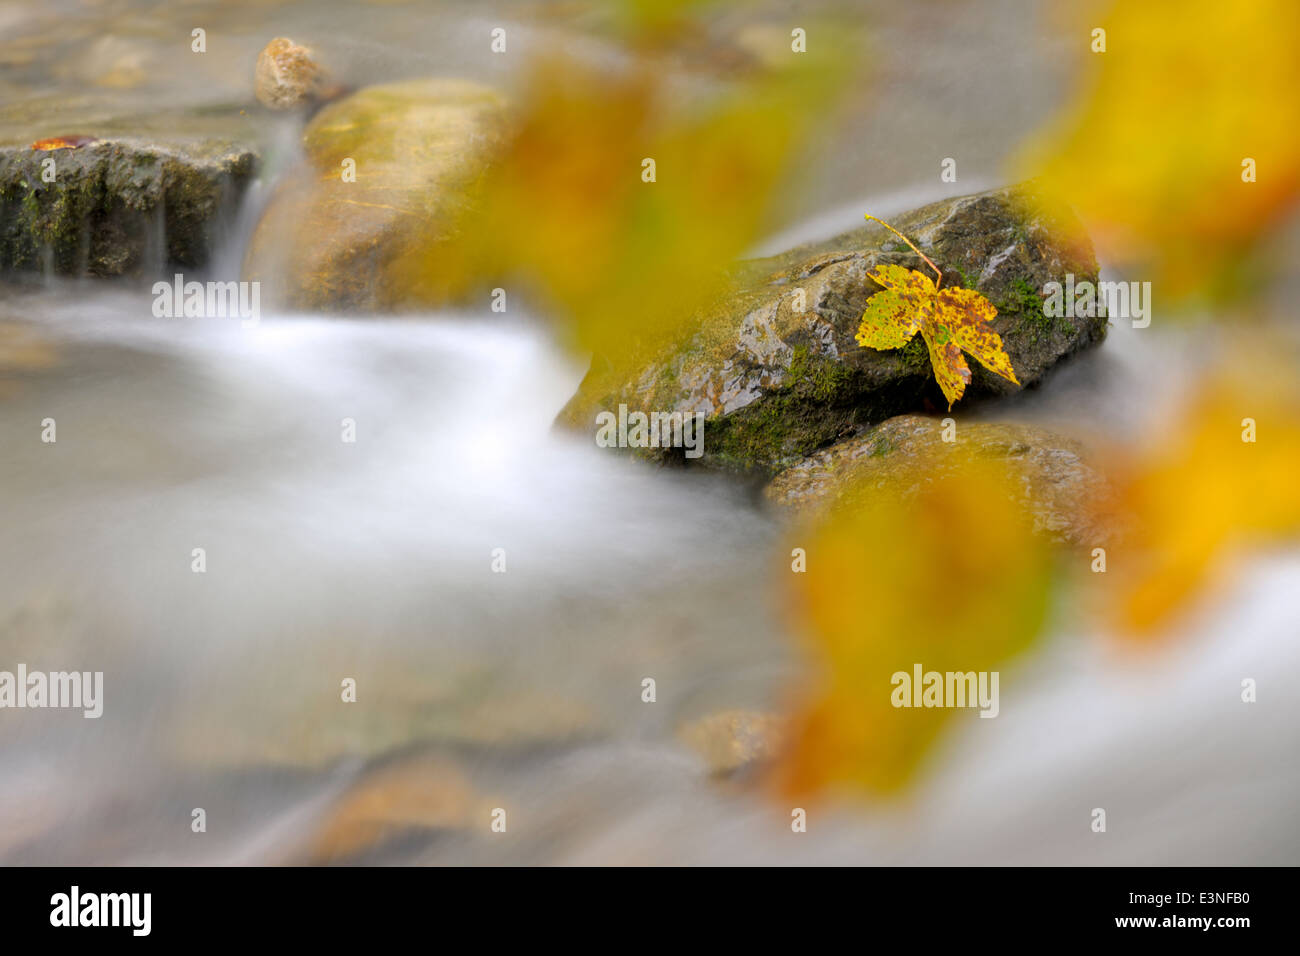 Mountainstream with autumn leave and slow shutter speed and out of focus leaves in foreground. Stock Photo